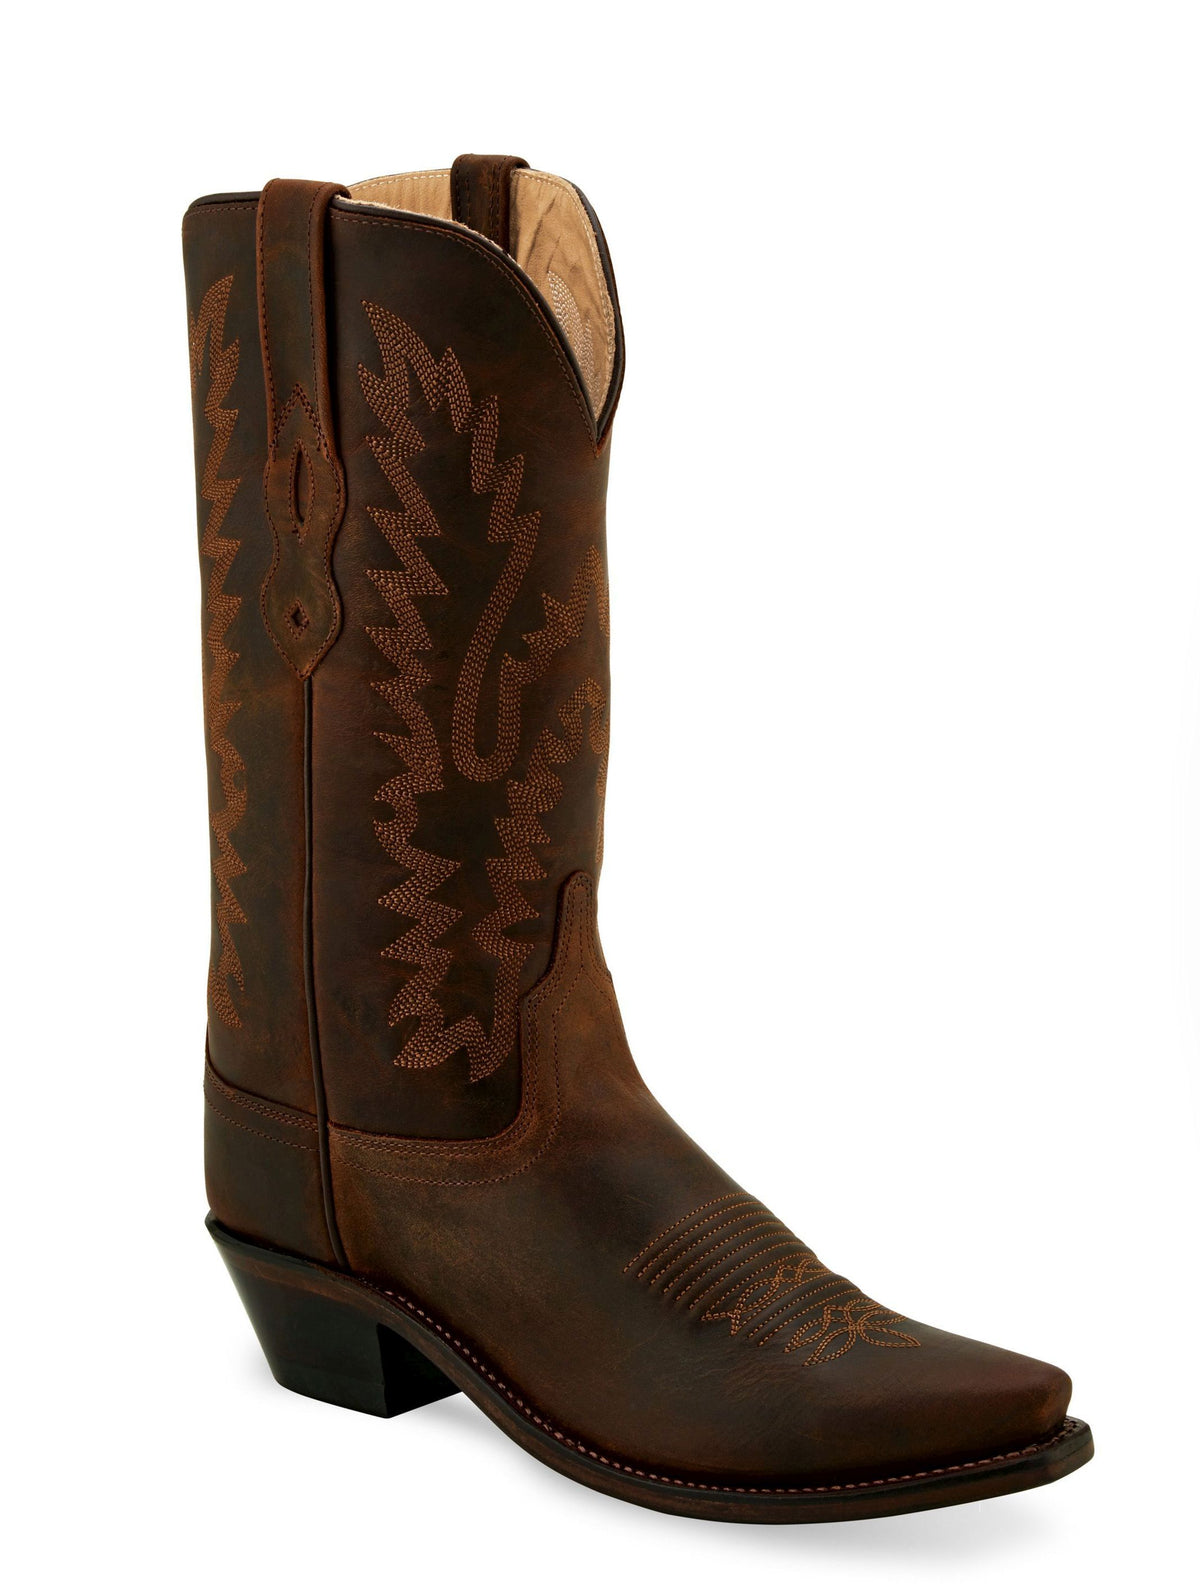 Old West Brown Women's Fashion Wear Boots